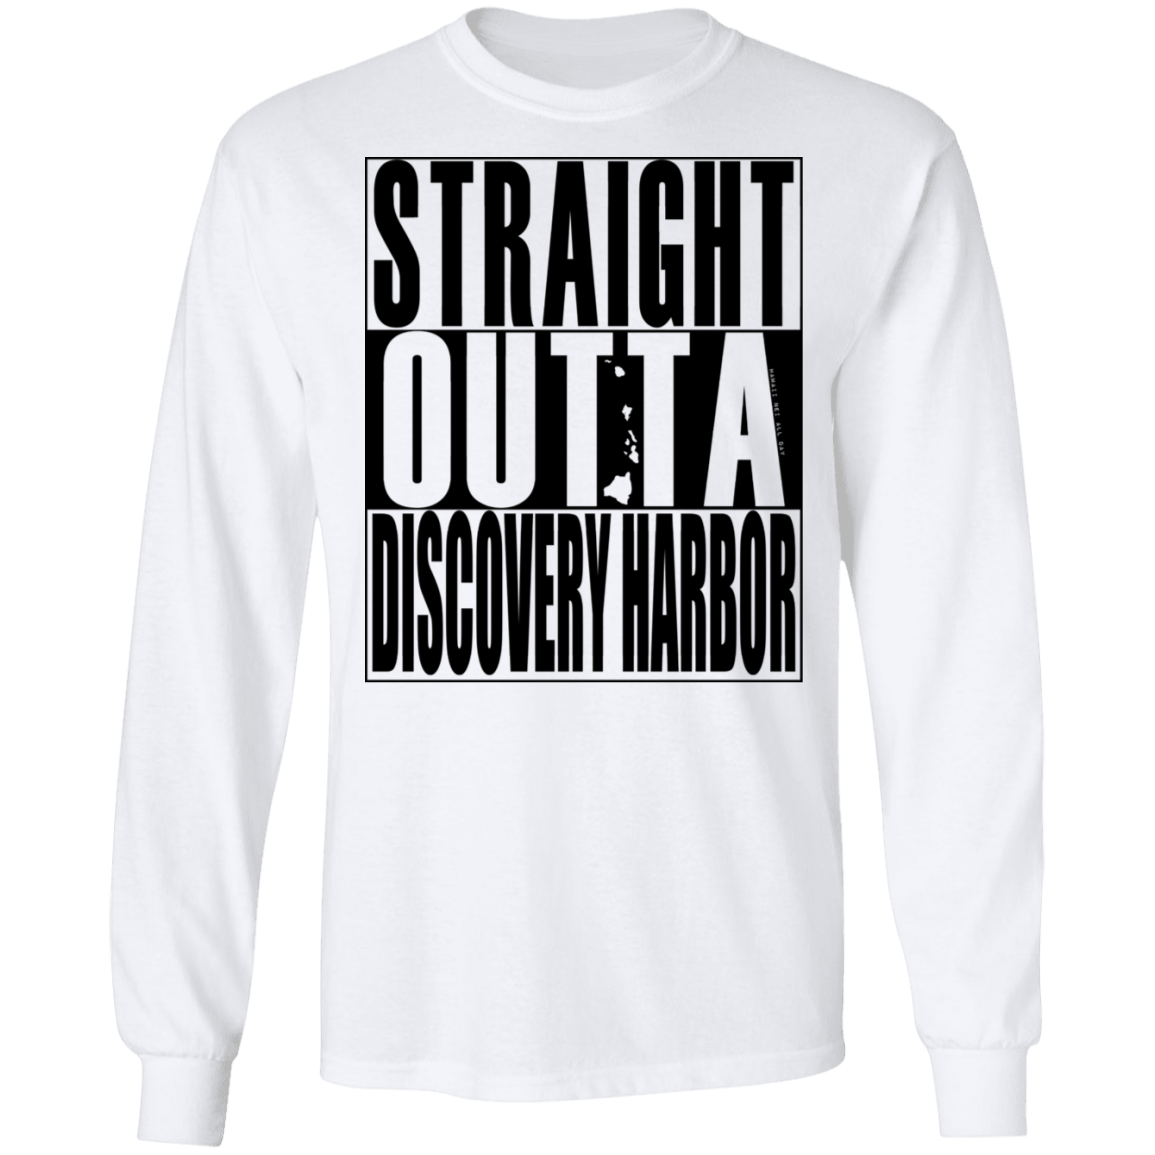 Straight Outta Discovery Harbor(black ink) LS T-Shirt